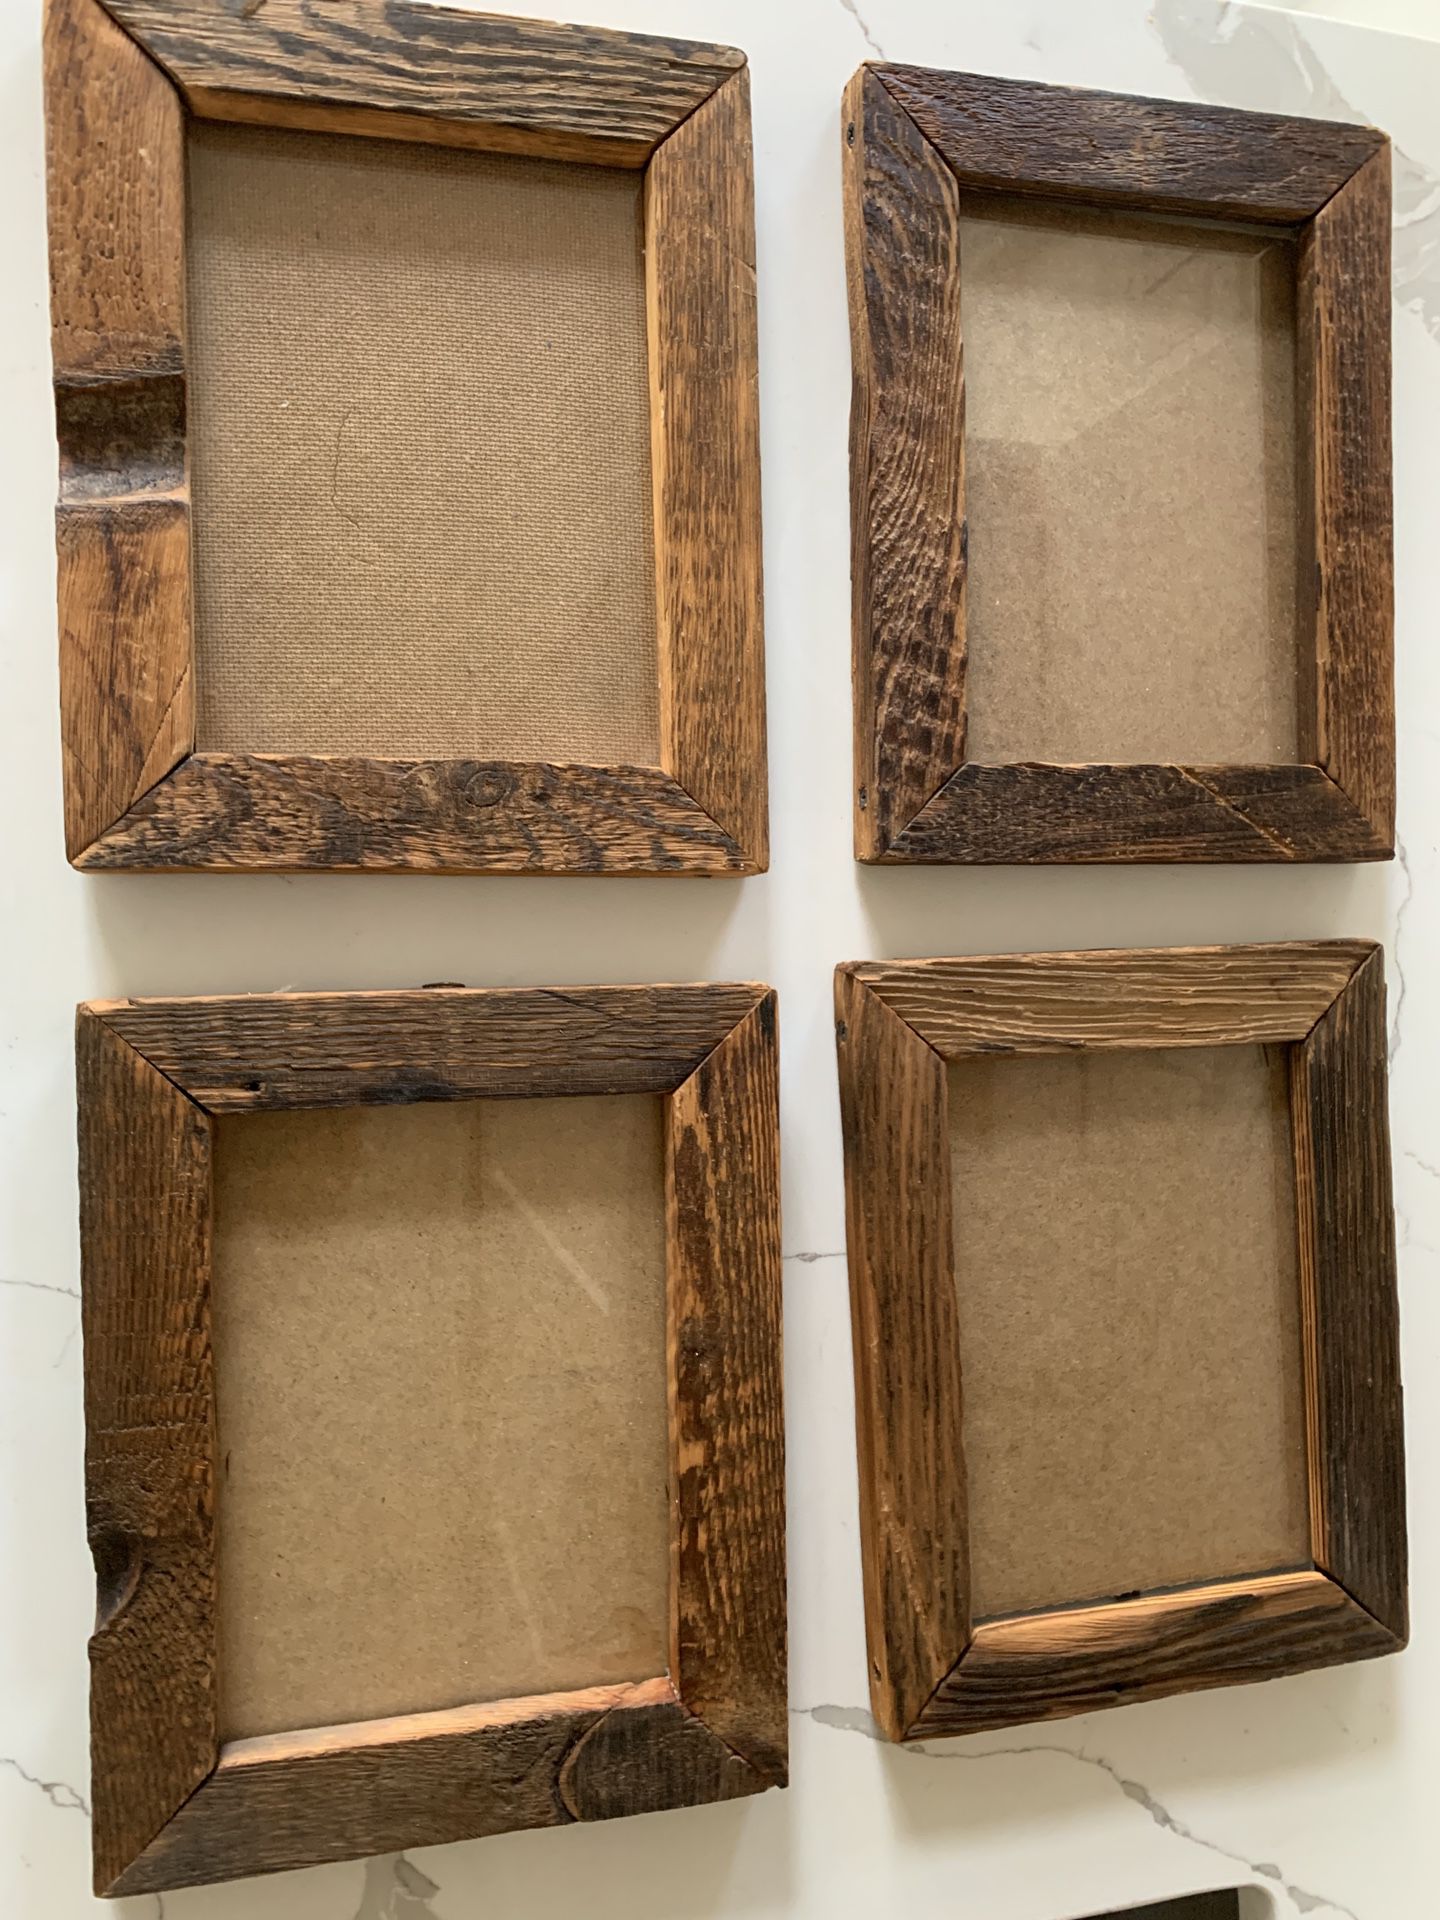 Four rustic 9 x 11” picture frames.